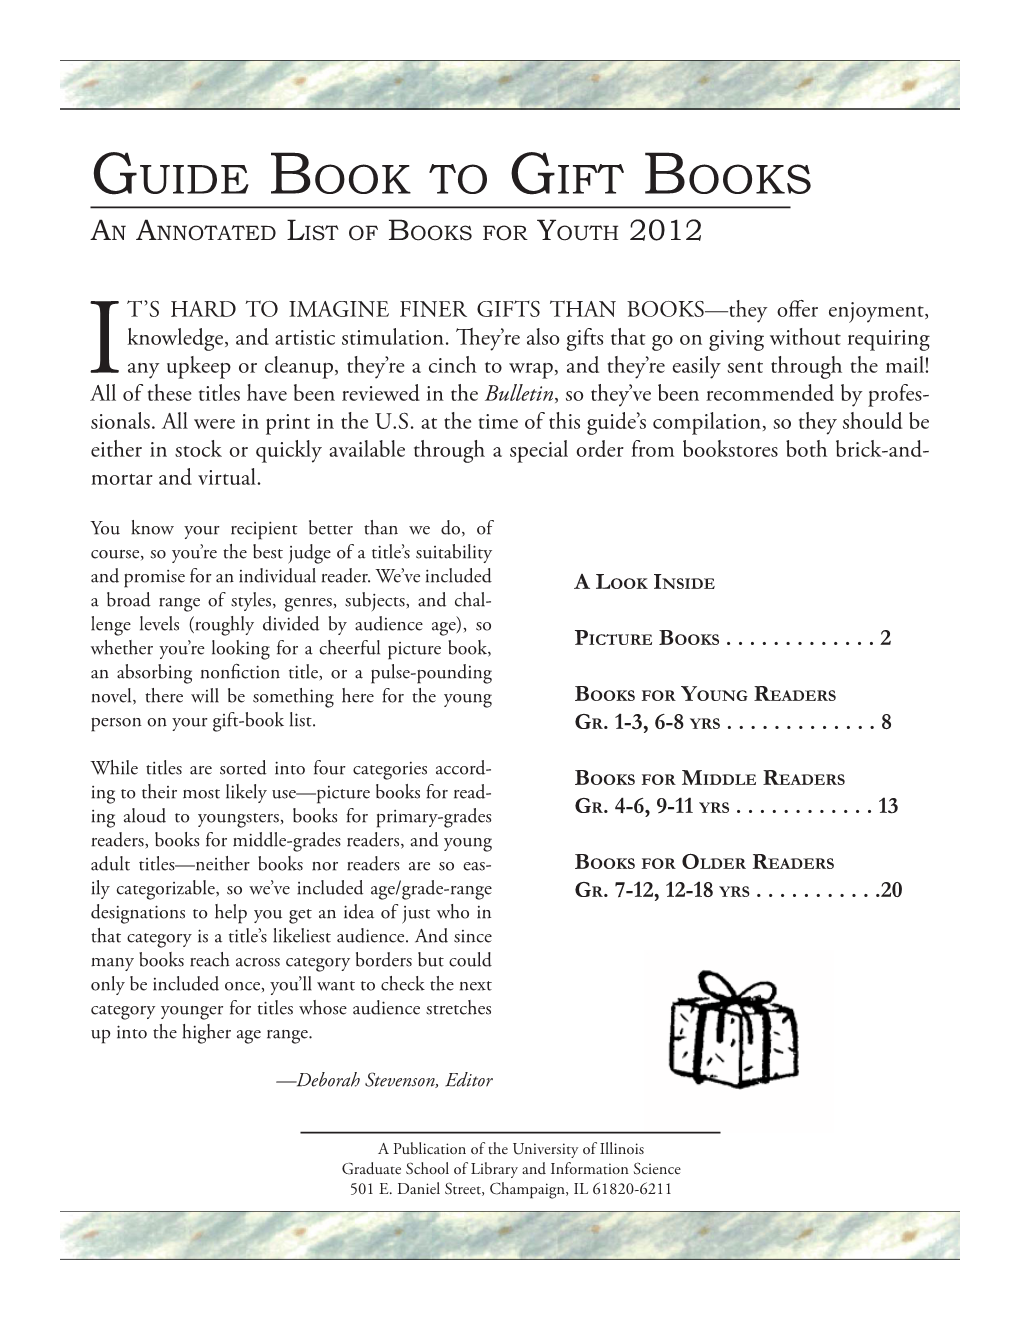 Guide Book to Gift Books an Annotated List of Books for Youth 2012